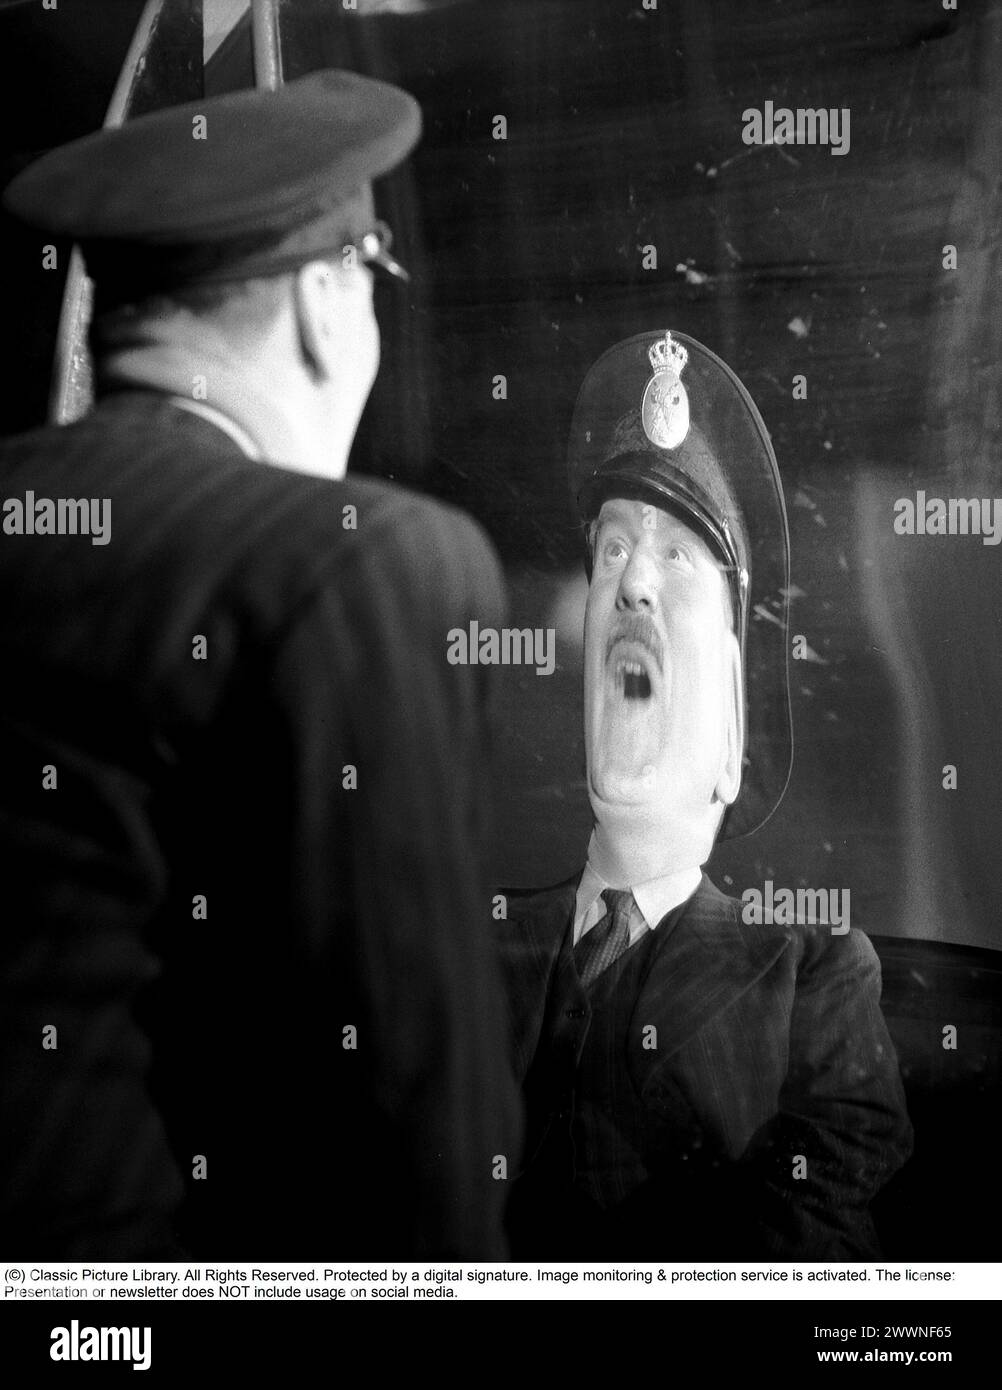 Laughing mirrors 1947. Actor Sigge Furst at the mirror attraction Skrattkammaren at the amusement park Gröna Lund, where he sees himself in a laughing mirror. Ordinary mirrors have a flat surface, while the mirrors at an amusement park could be curved both inwards and outwards, concave and convex. One mirror makes one look tall and thin. Others mirror short and thick. 1947. Kristoffersson ref AE45-12 Stock Photo